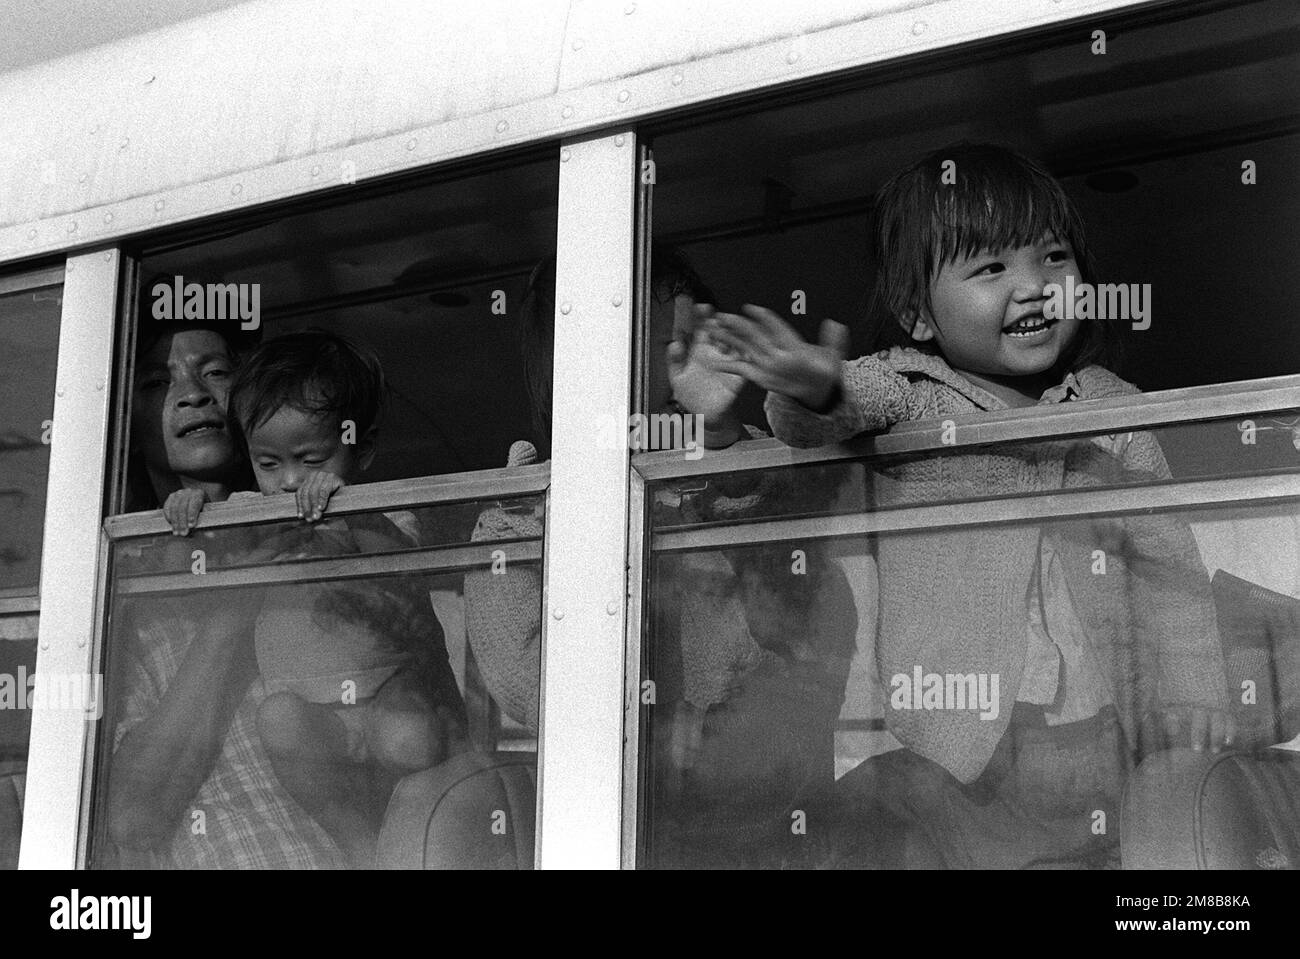 A Vietnamese refugee child smiles happily as she waves from a bus window. A total of 109 refugees are being transported to temporary quarters after arriving at Naval Base, Subic Bay aboard the petroleum tanker OVERSEAS VIVIAN (T-AOT-2006). The commercial tanker, which is operating under a charter with the Navy's Military Sealift Command, is transporting 109 Vietnamese refugees to Naval Base, Subic Bay, following their recovery from a disabled boat in the South China Sea on April 20th. Exact Date Shot Unknown. Country: Philippines (PHL) Stock Photo